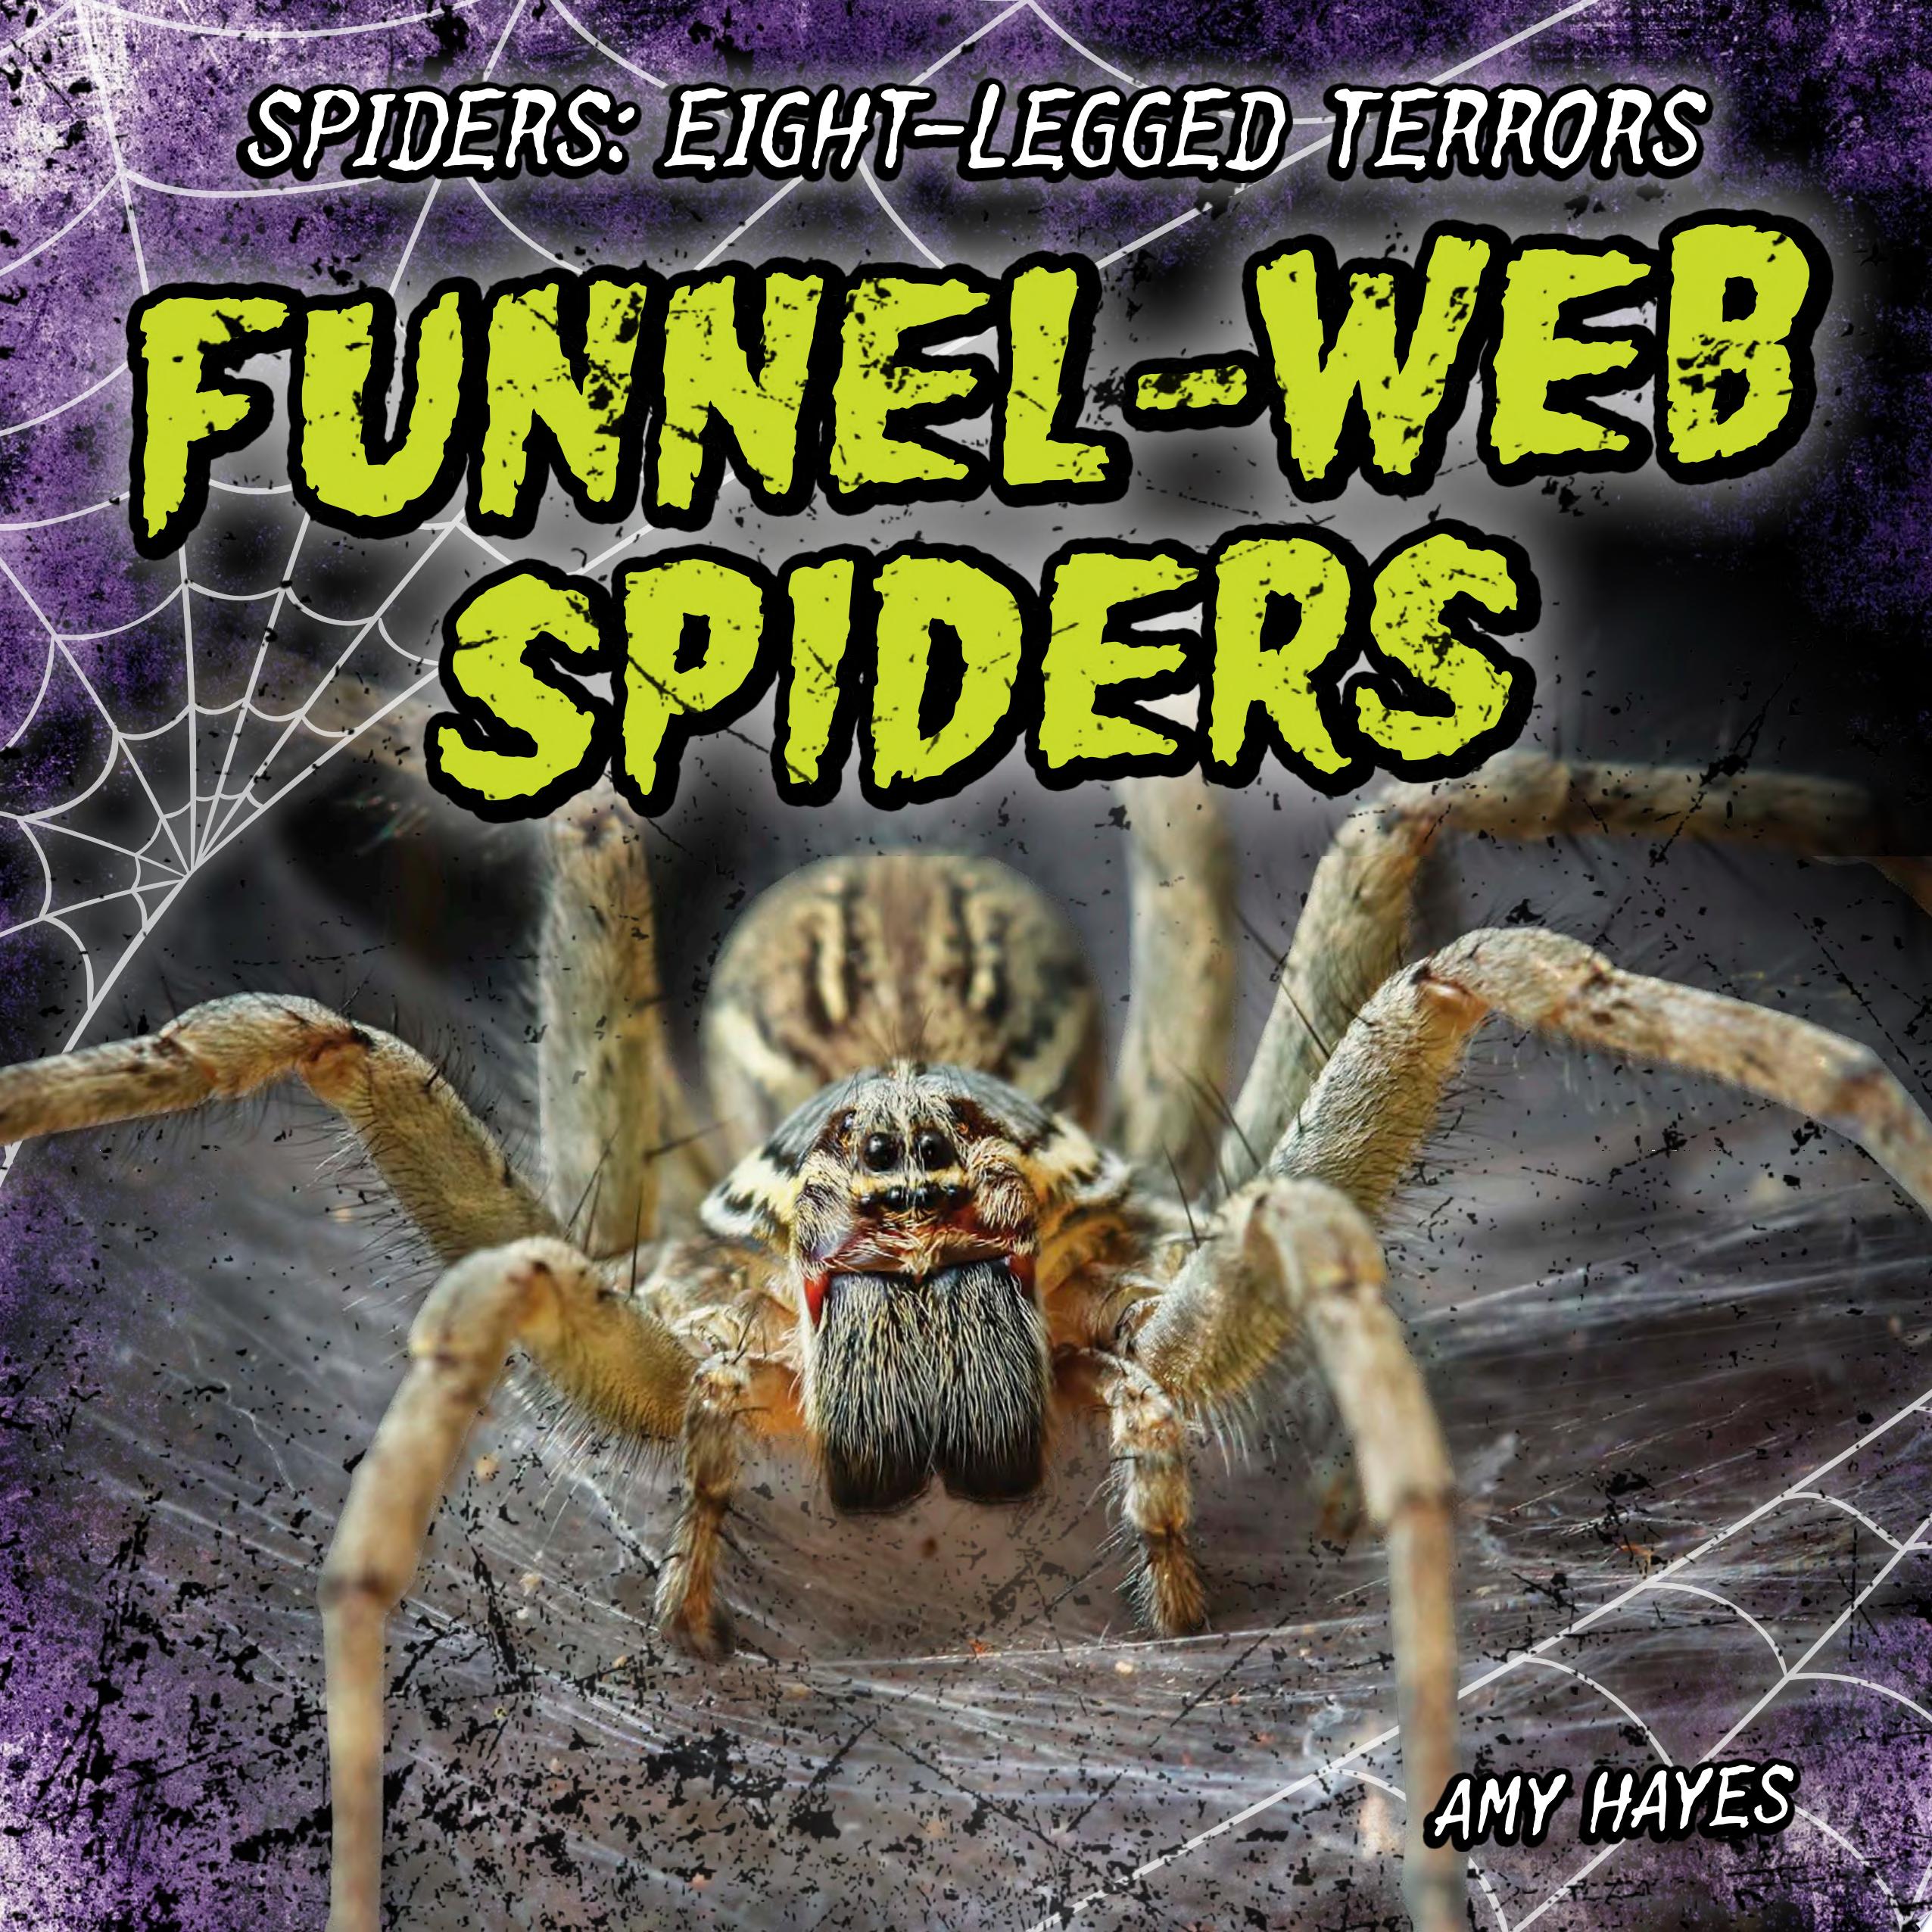 Image for "Funnel-Web Spiders"